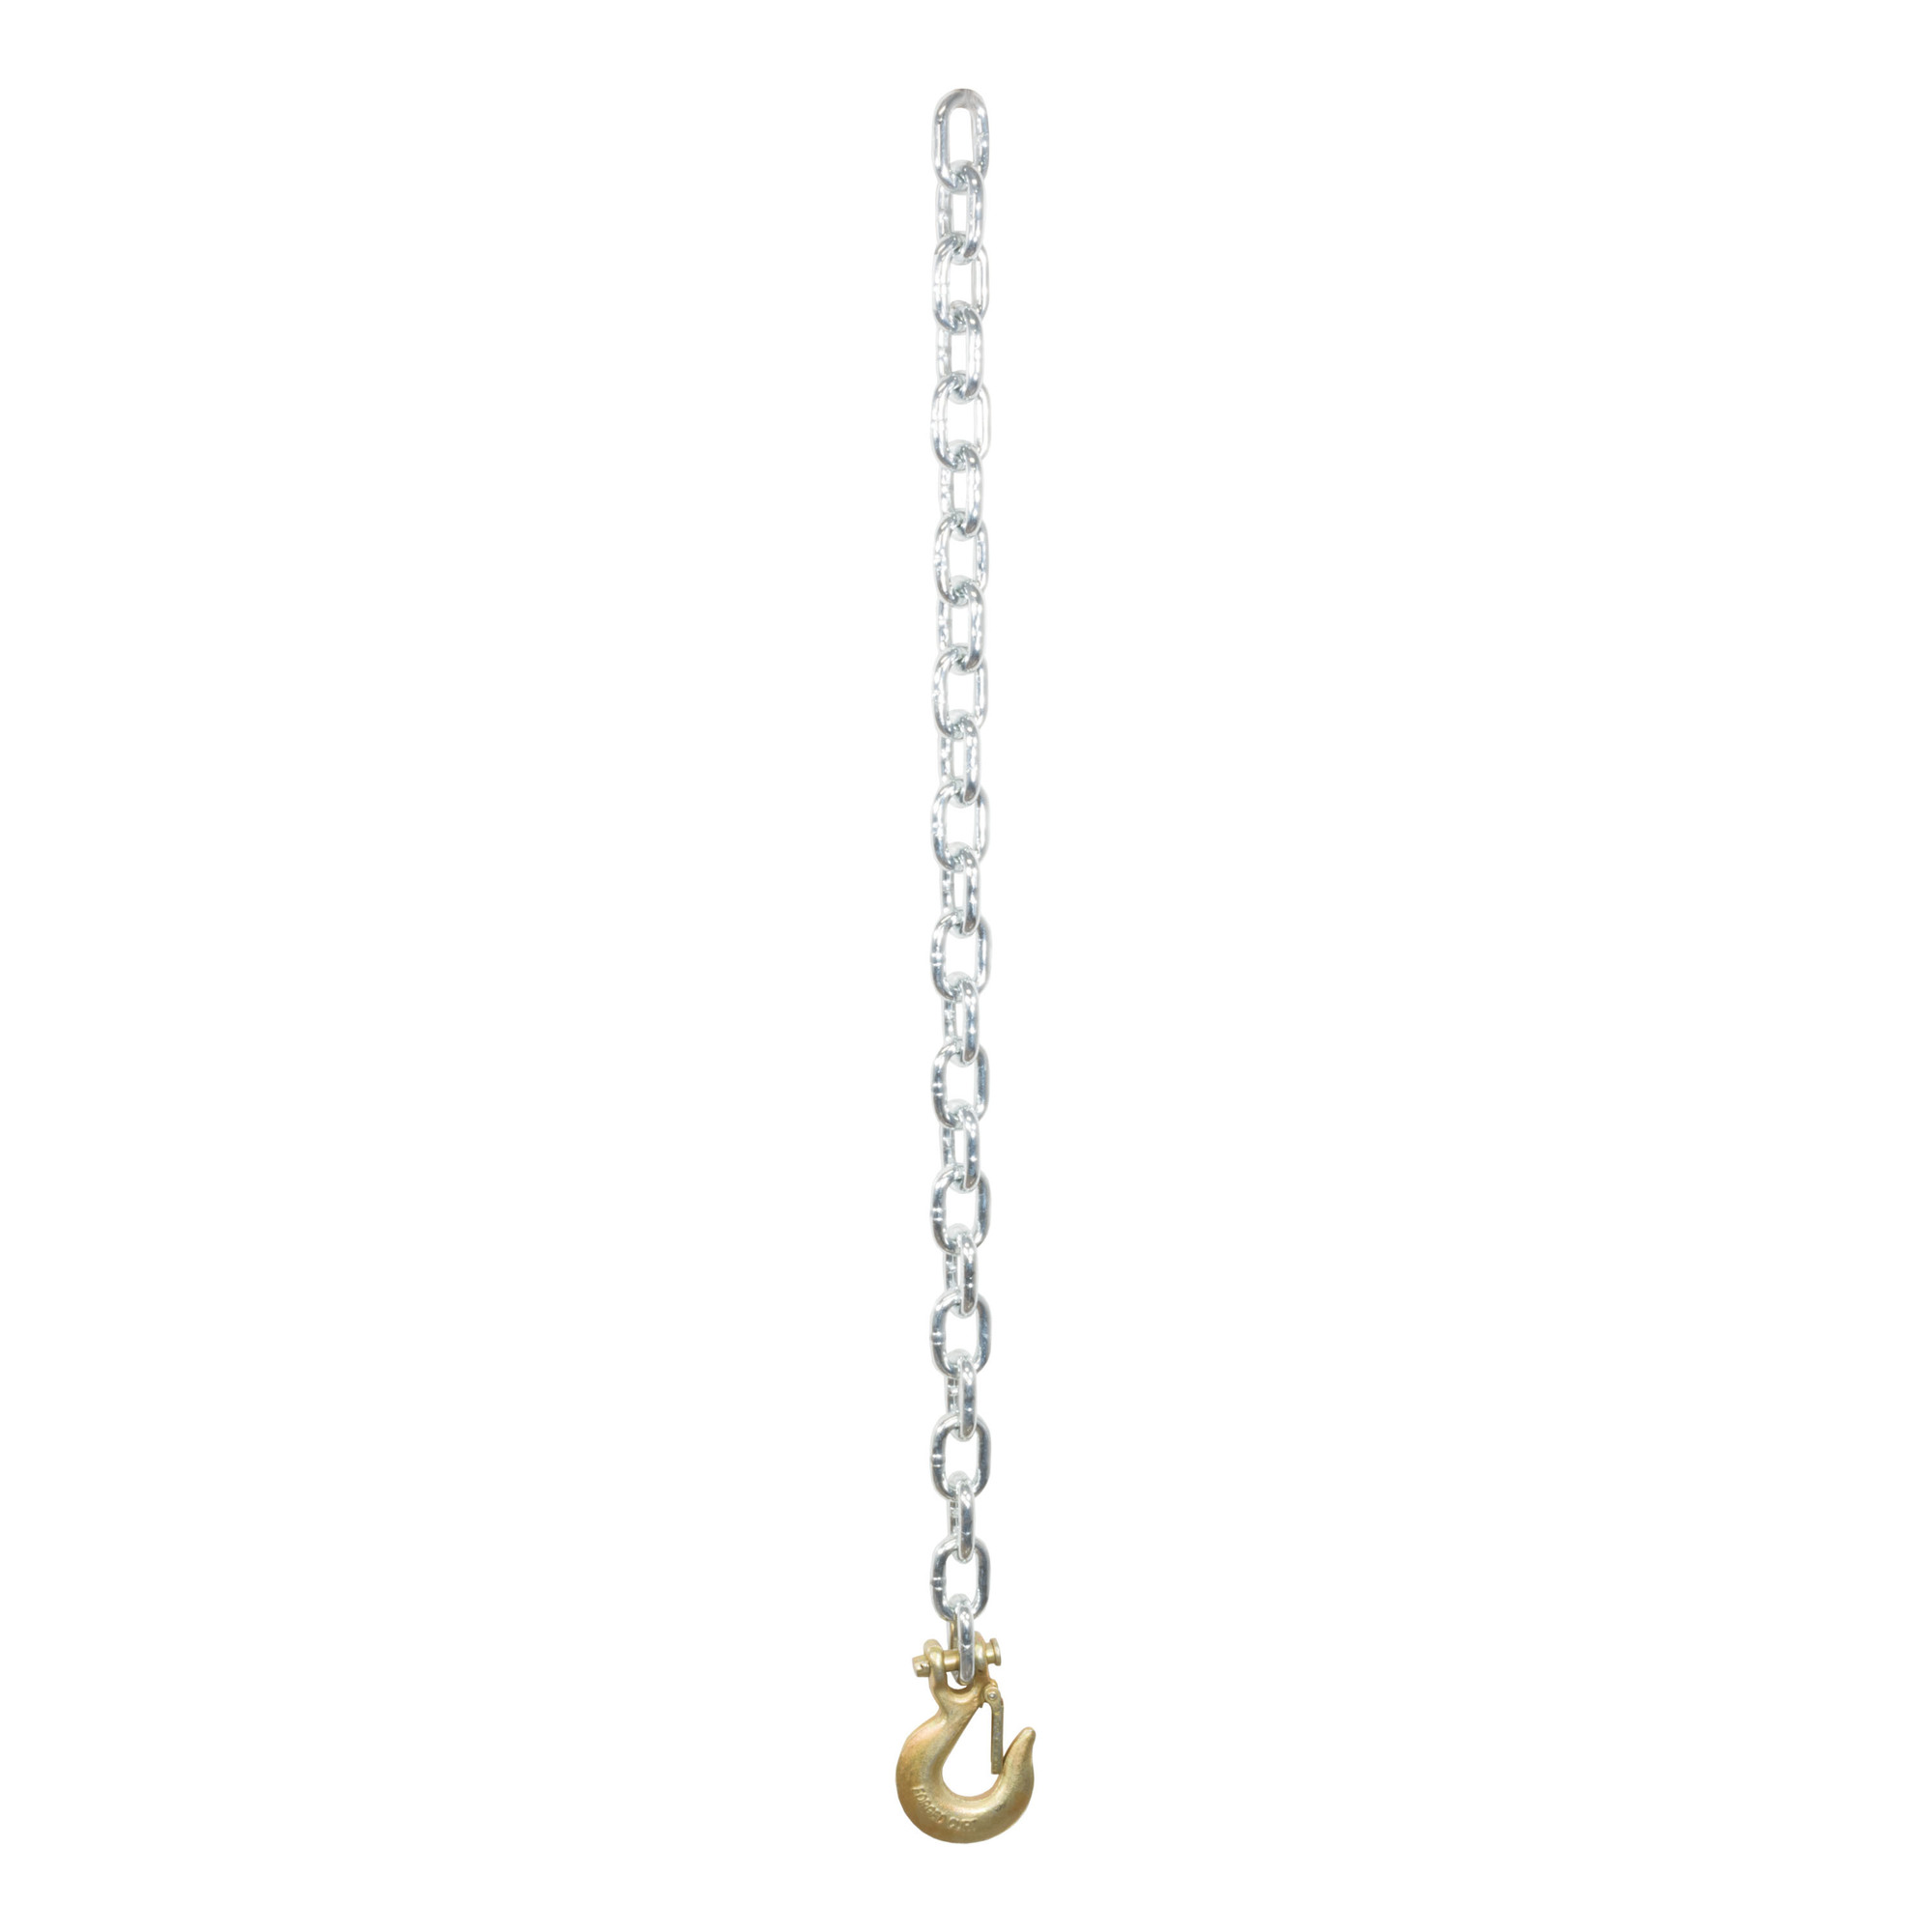 Curt Manufacturing, 35Inch Safety Chain with 1 Clevis Hook, Length 35 in, Material Steel, Model 80314